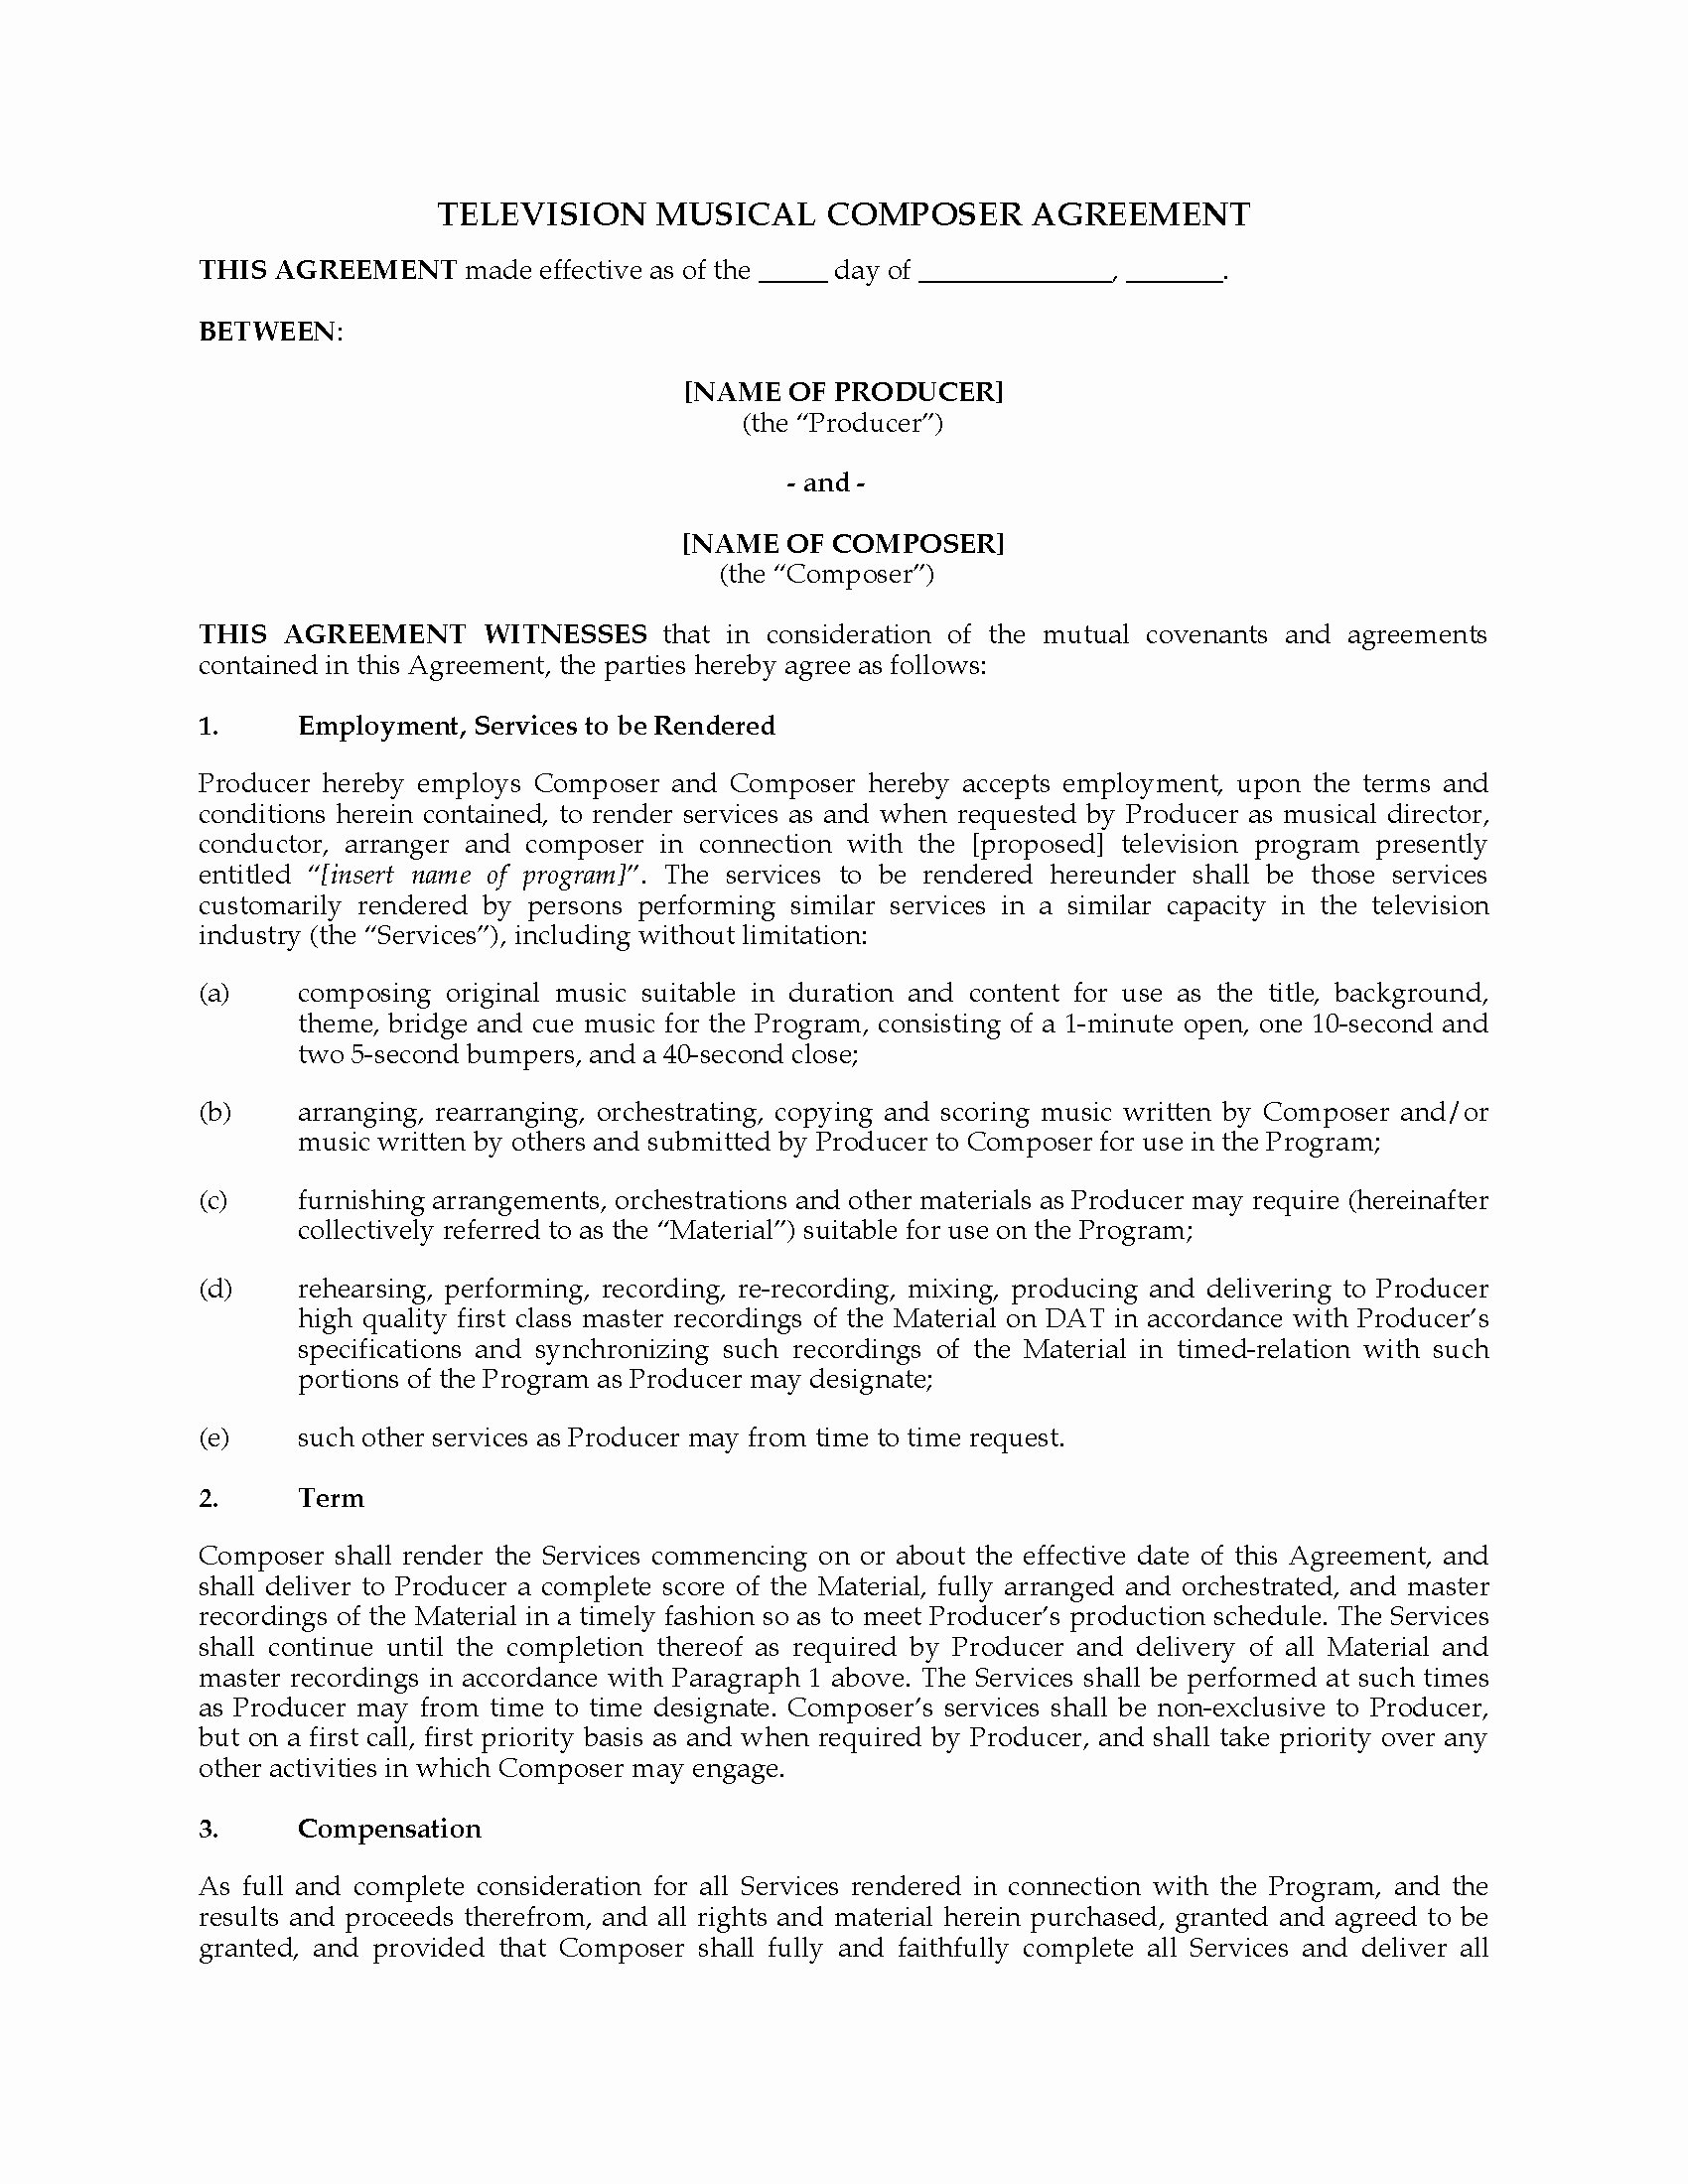 Music Producer Agreement Template New Television Music Poser Agreement